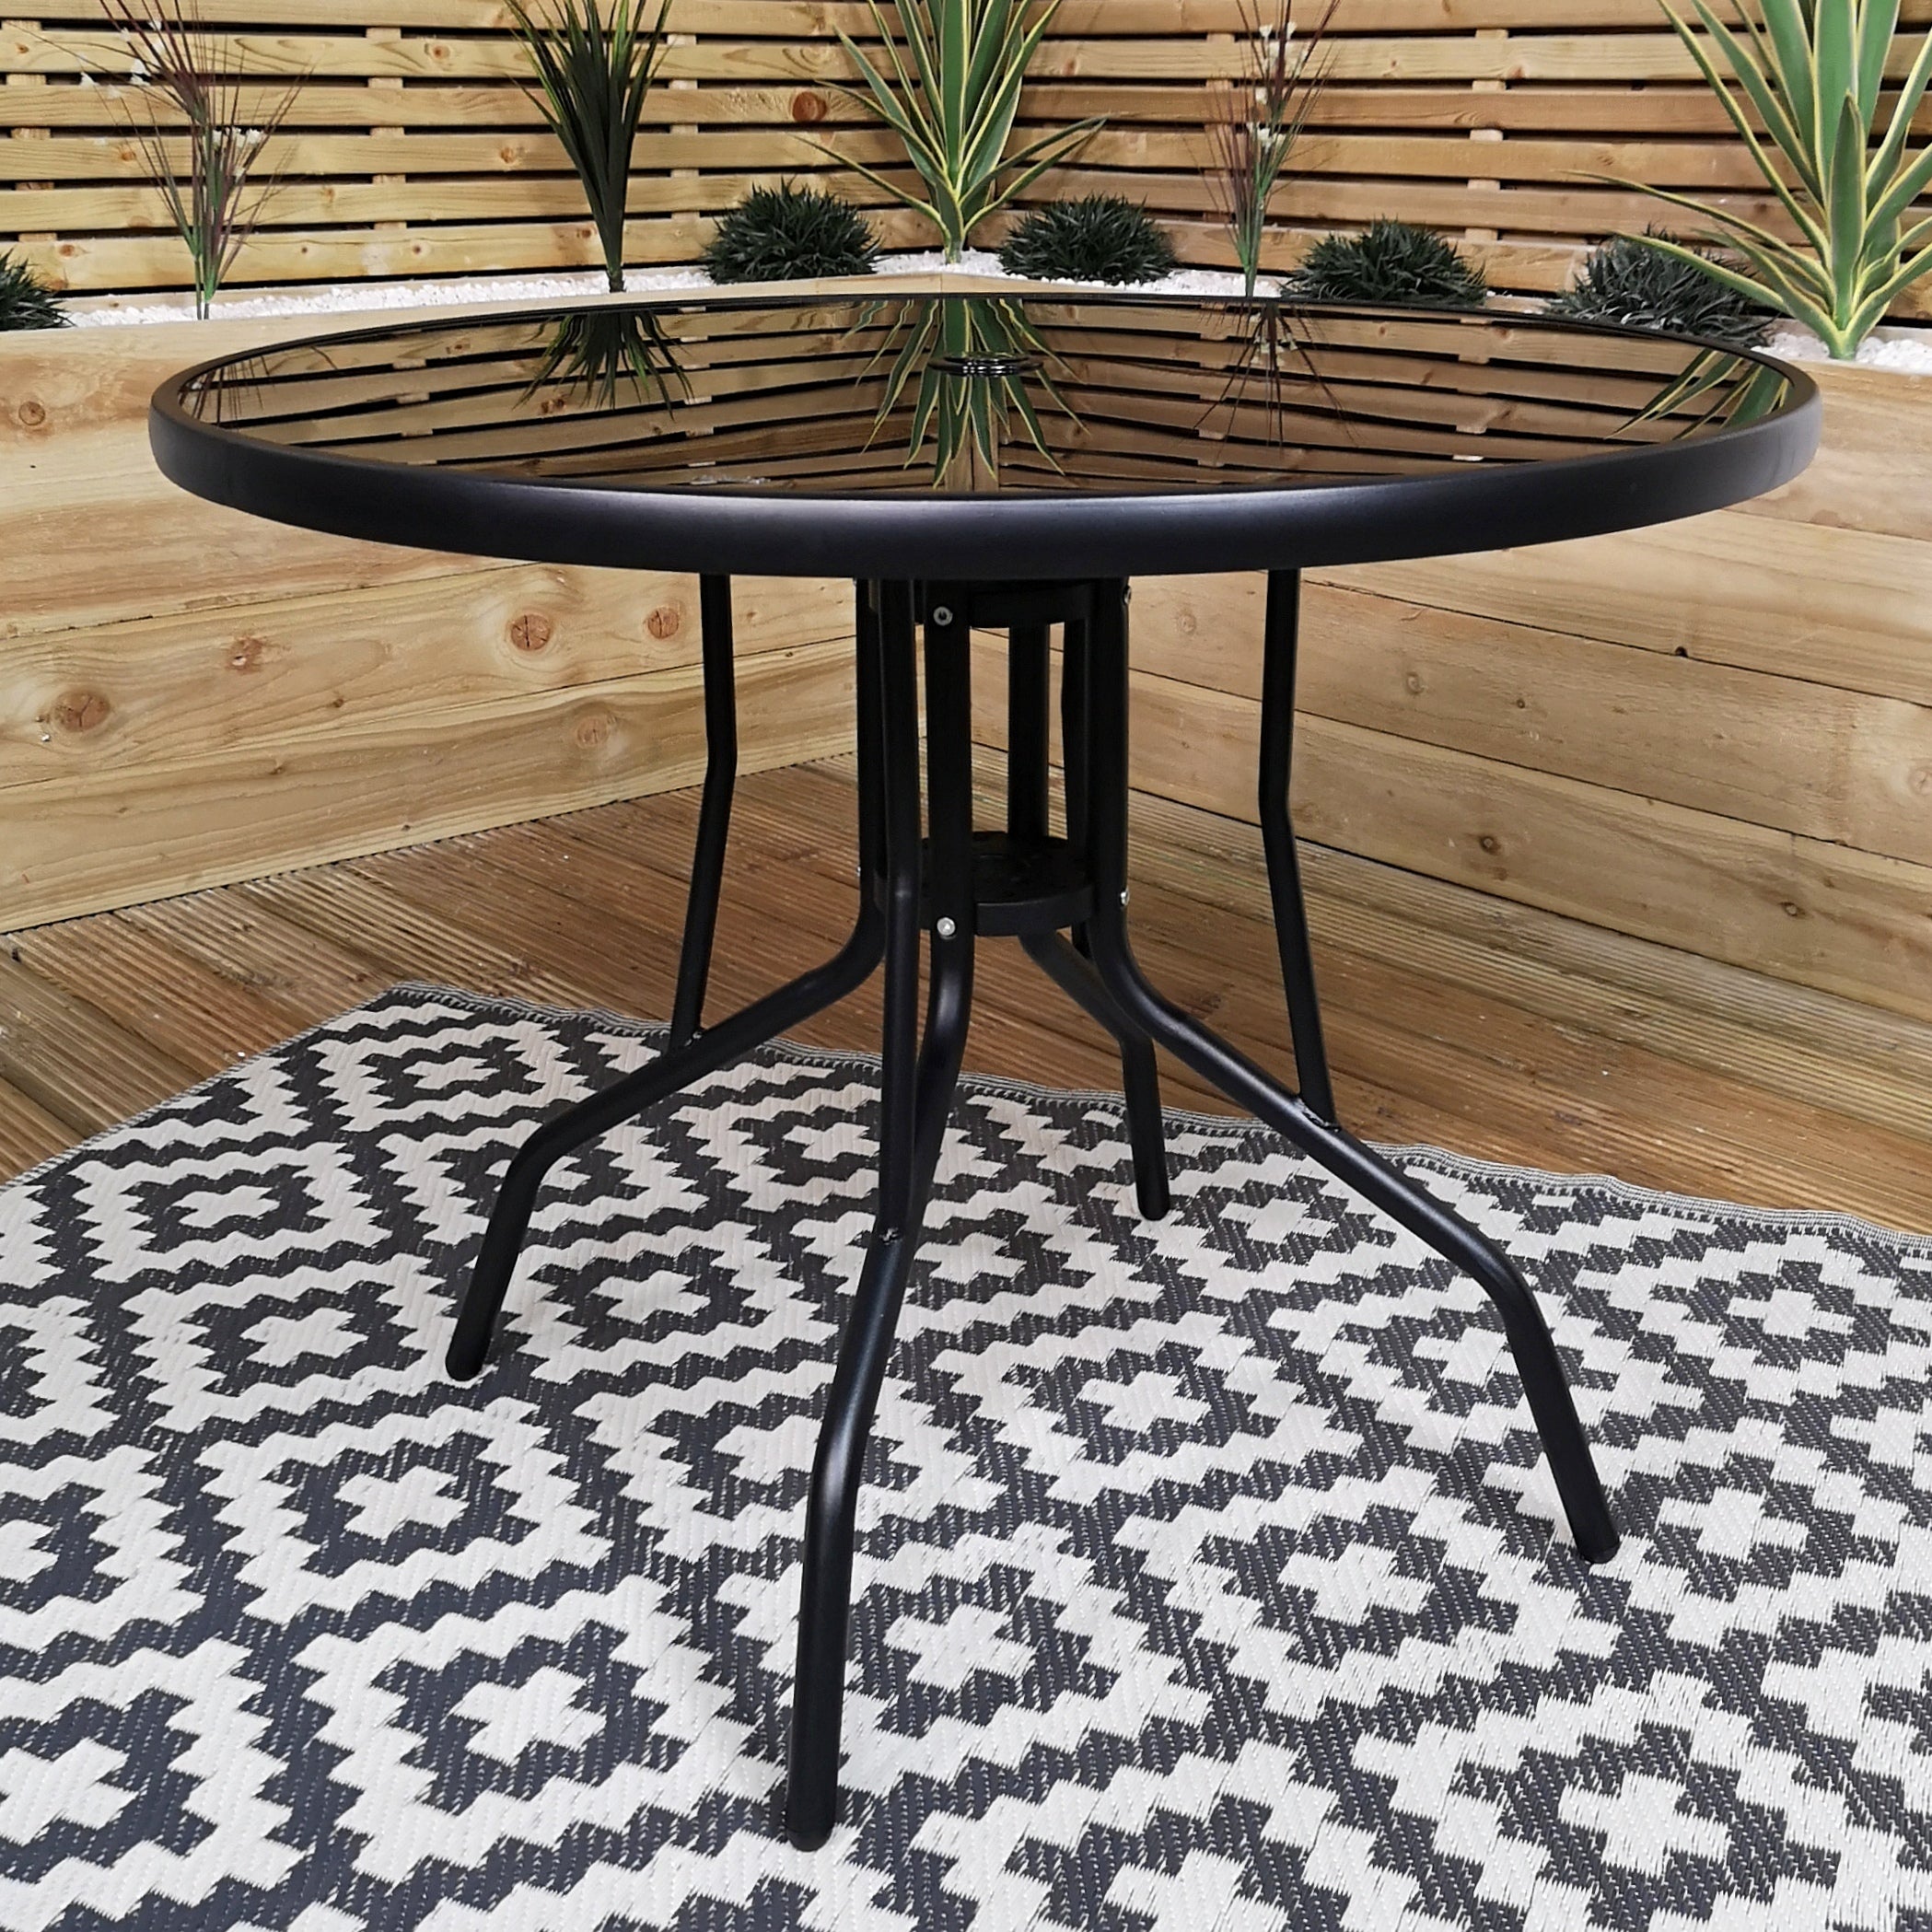 Outdoor 4 Person Round Glass Top Garden Patio Dining Table Chairs Black Parasol and Base Set